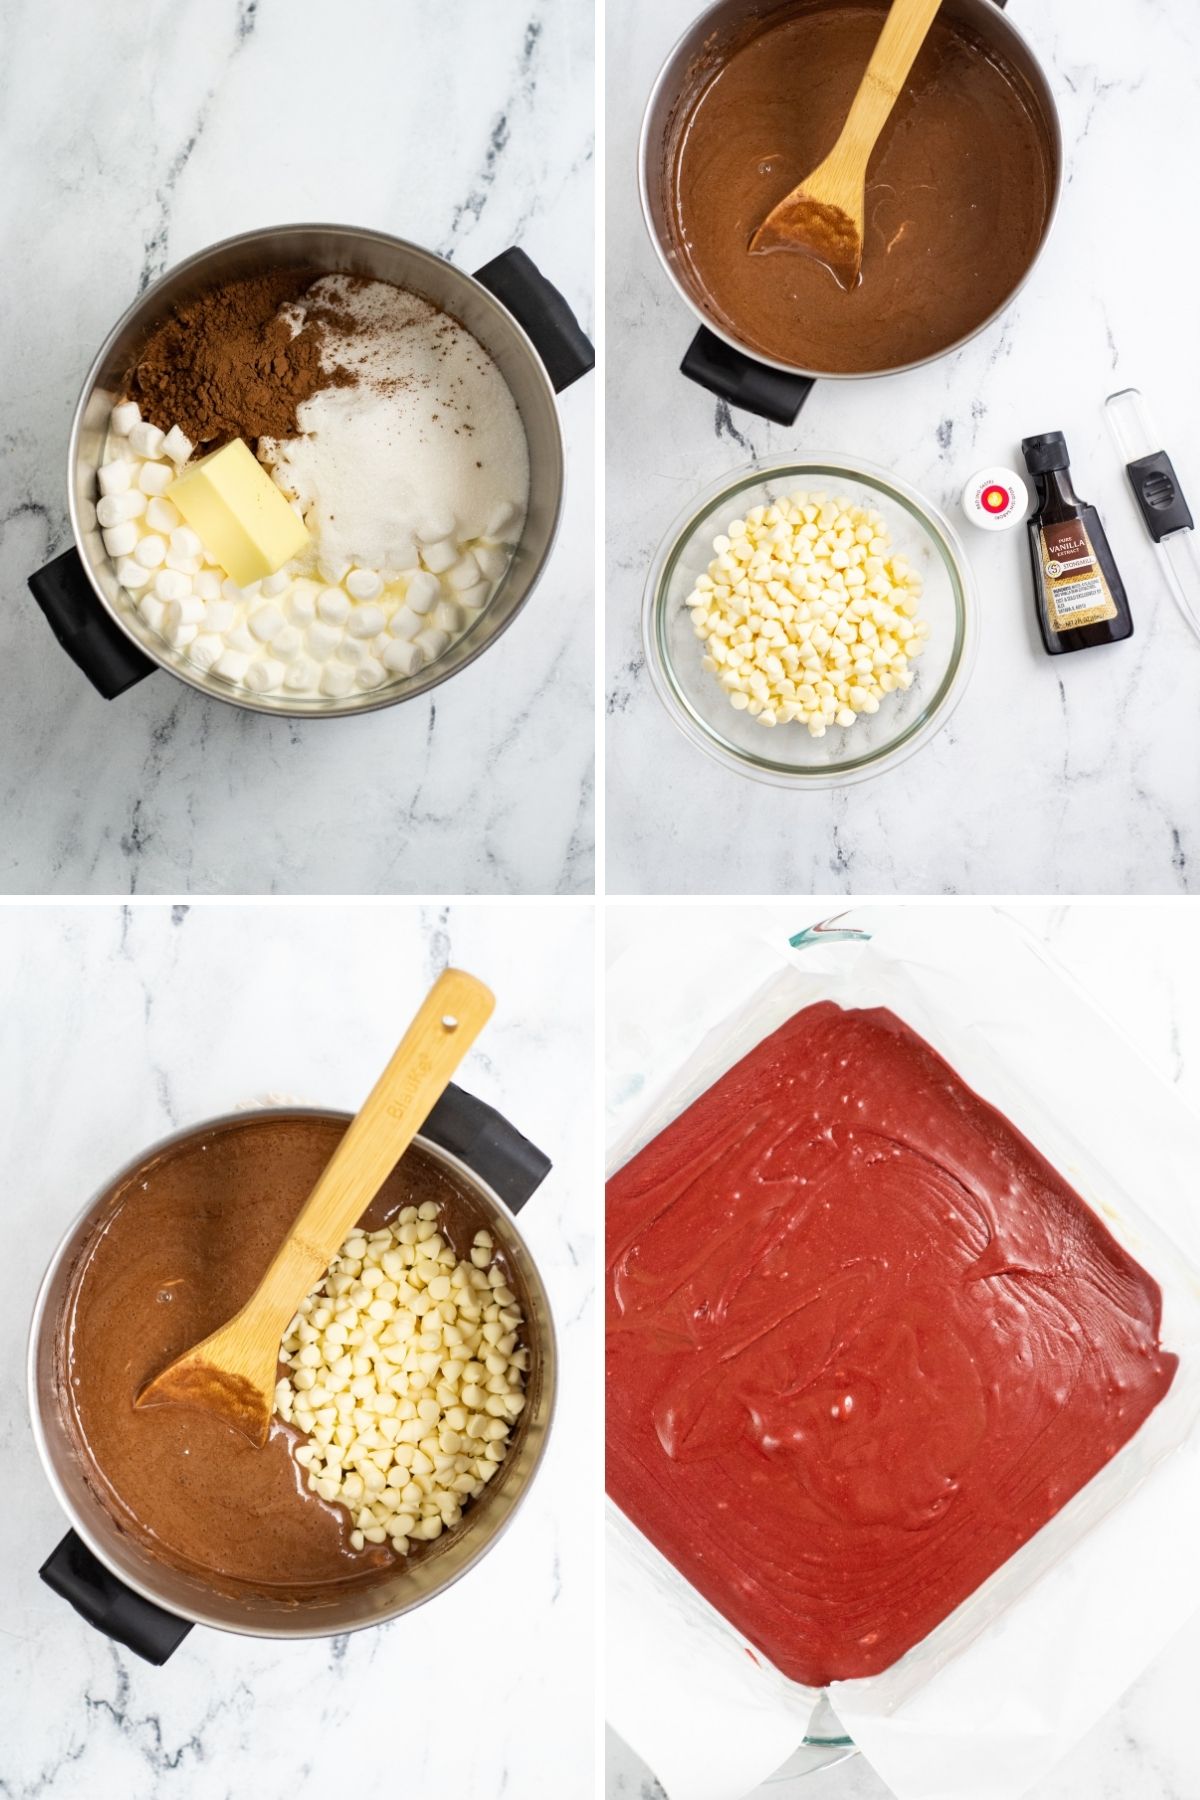 four images: sugar, cocoa, marshmallows and butter in sauce pan; melted chocolate in sauce pan with side of white chocolate chips and red food coloring; white chocolate chips in melted chocolate with wooden spoon; red velvet fudge mix in square baking pan